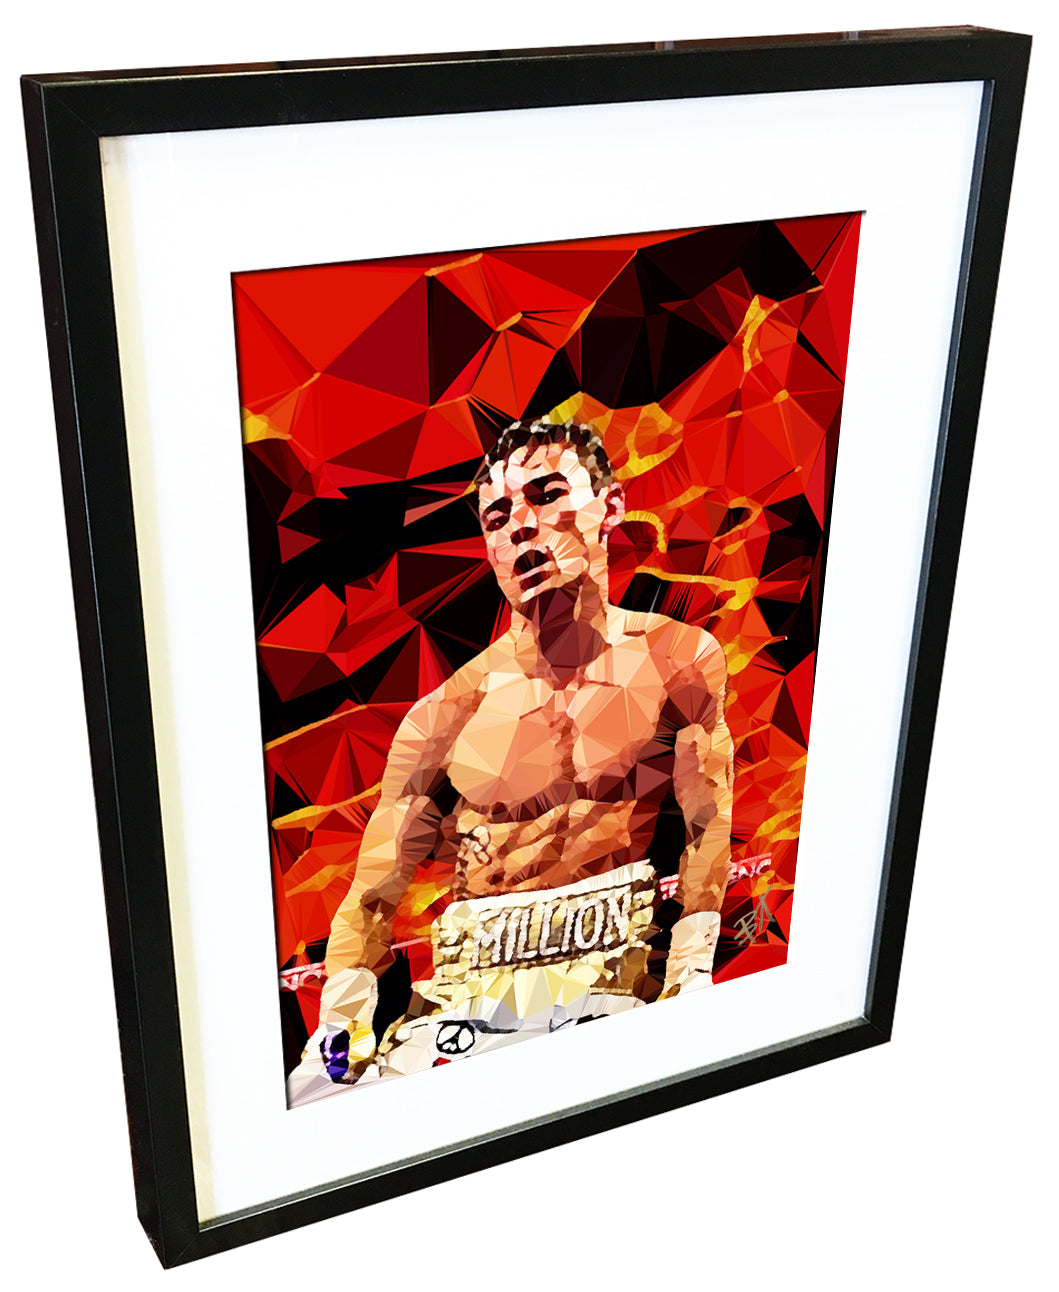 Anthony Crolla by Baiba Auria - signed art print - Egoiste Gallery - Art Gallery in Manchester City Centre